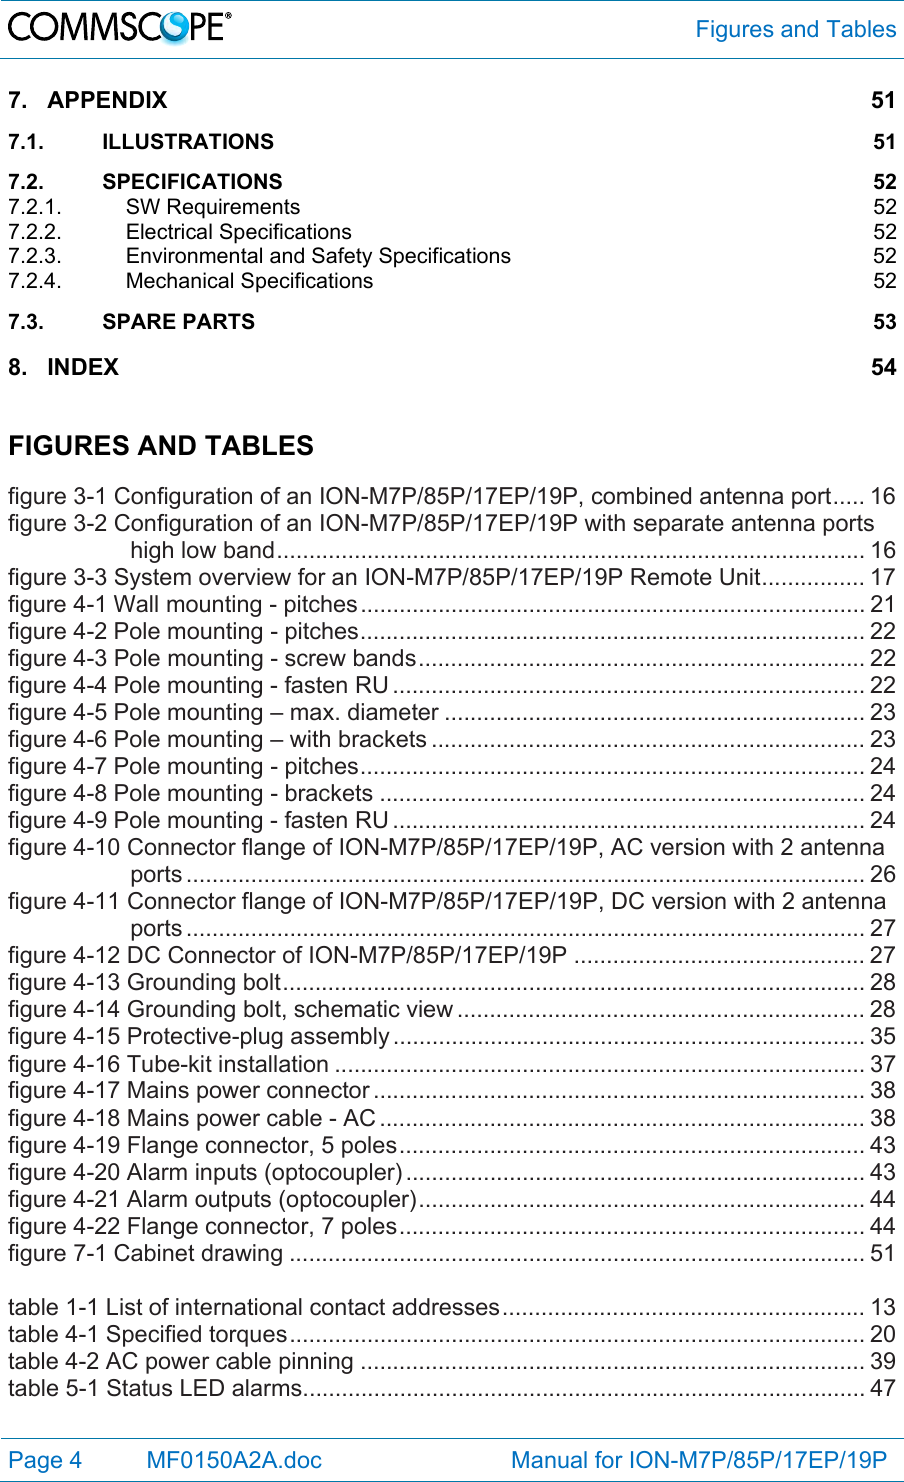  Figures and Tables Page 4   MF0150A2A.doc                             Manual for ION-M7P/85P/17EP/19P  7.APPENDIX 517.1.ILLUSTRATIONS 517.2.SPECIFICATIONS 527.2.1.SW Requirements  527.2.2.Electrical Specifications  527.2.3.Environmental and Safety Specifications  527.2.4.Mechanical Specifications  527.3.SPARE PARTS  538.INDEX 54  FIGURES AND TABLES  figure 3-1 Configuration of an ION-M7P/85P/17EP/19P, combined antenna port ..... 16figure 3-2 Configuration of an ION-M7P/85P/17EP/19P with separate antenna ports high low band ........................................................................................... 16figure 3-3 System overview for an ION-M7P/85P/17EP/19P Remote Unit ................ 17figure 4-1 Wall mounting - pitches .............................................................................. 21figure 4-2 Pole mounting - pitches .............................................................................. 22figure 4-3 Pole mounting - screw bands ..................................................................... 22figure 4-4 Pole mounting - fasten RU ......................................................................... 22figure 4-5 Pole mounting – max. diameter ................................................................. 23figure 4-6 Pole mounting – with brackets ................................................................... 23figure 4-7 Pole mounting - pitches .............................................................................. 24figure 4-8 Pole mounting - brackets ........................................................................... 24figure 4-9 Pole mounting - fasten RU ......................................................................... 24figure 4-10 Connector flange of ION-M7P/85P/17EP/19P, AC version with 2 antenna ports ......................................................................................................... 26figure 4-11 Connector flange of ION-M7P/85P/17EP/19P, DC version with 2 antenna ports ......................................................................................................... 27figure 4-12 DC Connector of ION-M7P/85P/17EP/19P ............................................. 27figure 4-13 Grounding bolt .......................................................................................... 28figure 4-14 Grounding bolt, schematic view ............................................................... 28figure 4-15 Protective-plug assembly ......................................................................... 35figure 4-16 Tube-kit installation .................................................................................. 37figure 4-17 Mains power connector ............................................................................ 38figure 4-18 Mains power cable - AC ........................................................................... 38figure 4-19 Flange connector, 5 poles ........................................................................ 43figure 4-20 Alarm inputs (optocoupler) ....................................................................... 43figure 4-21 Alarm outputs (optocoupler) ..................................................................... 44figure 4-22 Flange connector, 7 poles ........................................................................ 44figure 7-1 Cabinet drawing ......................................................................................... 51 table 1-1 List of international contact addresses ........................................................ 13table 4-1 Specified torques ......................................................................................... 20table 4-2 AC power cable pinning .............................................................................. 39table 5-1 Status LED alarms ....................................................................................... 47 